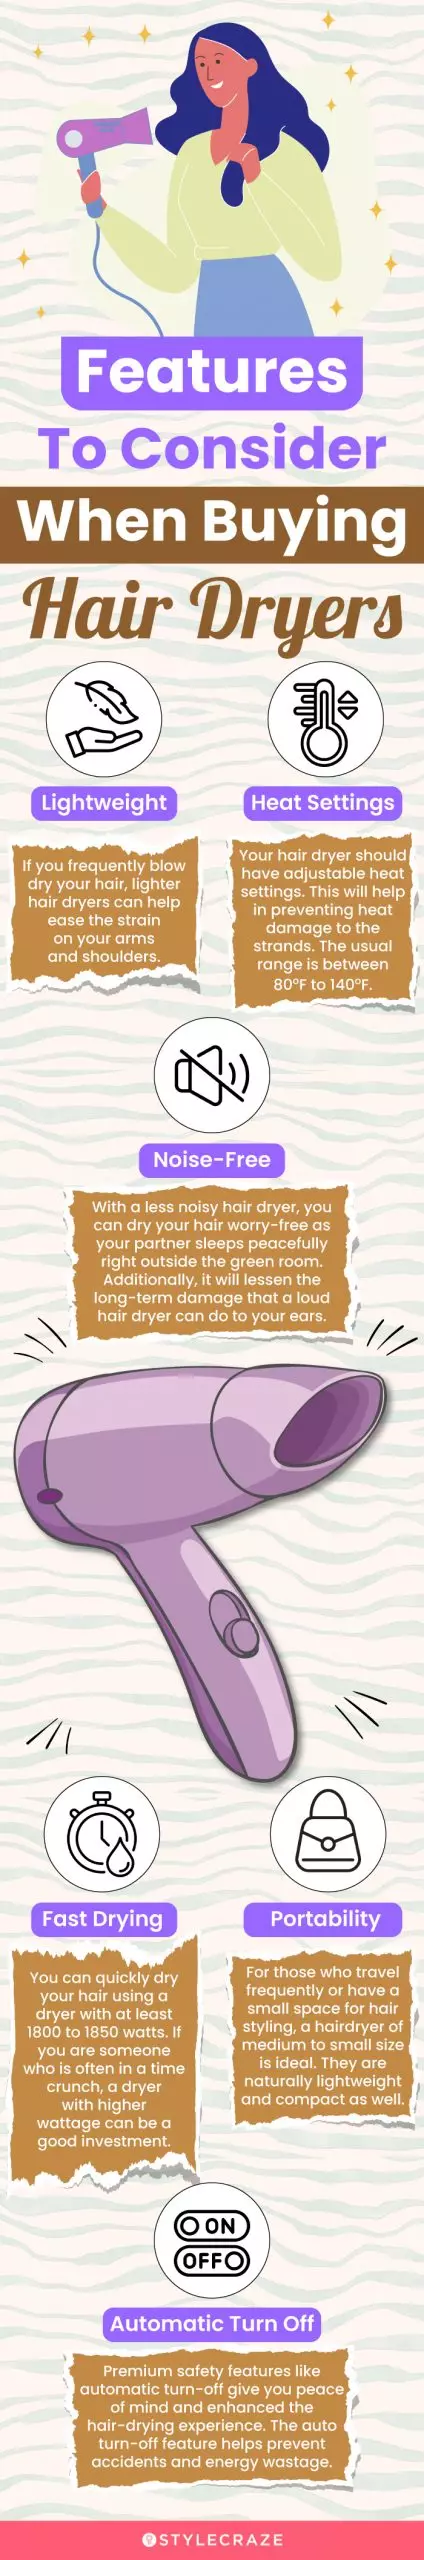 Features To Consider When Buying Hair Dryers (infographic)